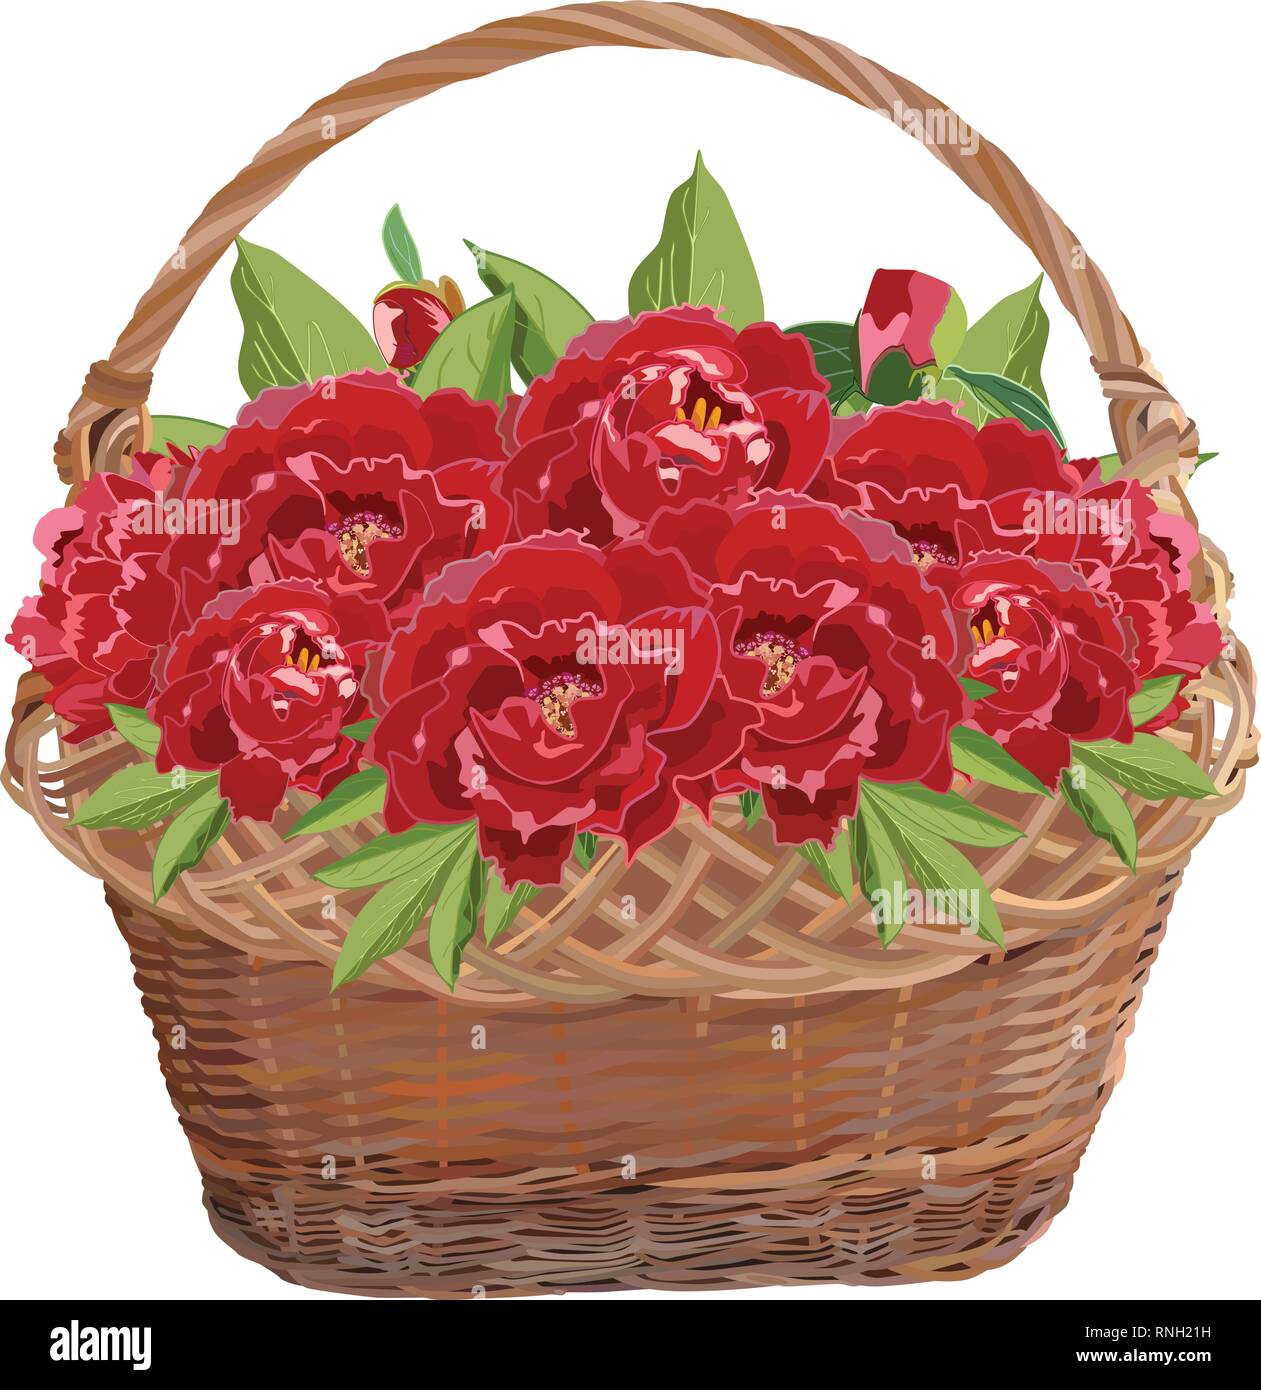 Wicker basket with red peony flowers. Vector flat illustration isolated on white background. Stock Vector